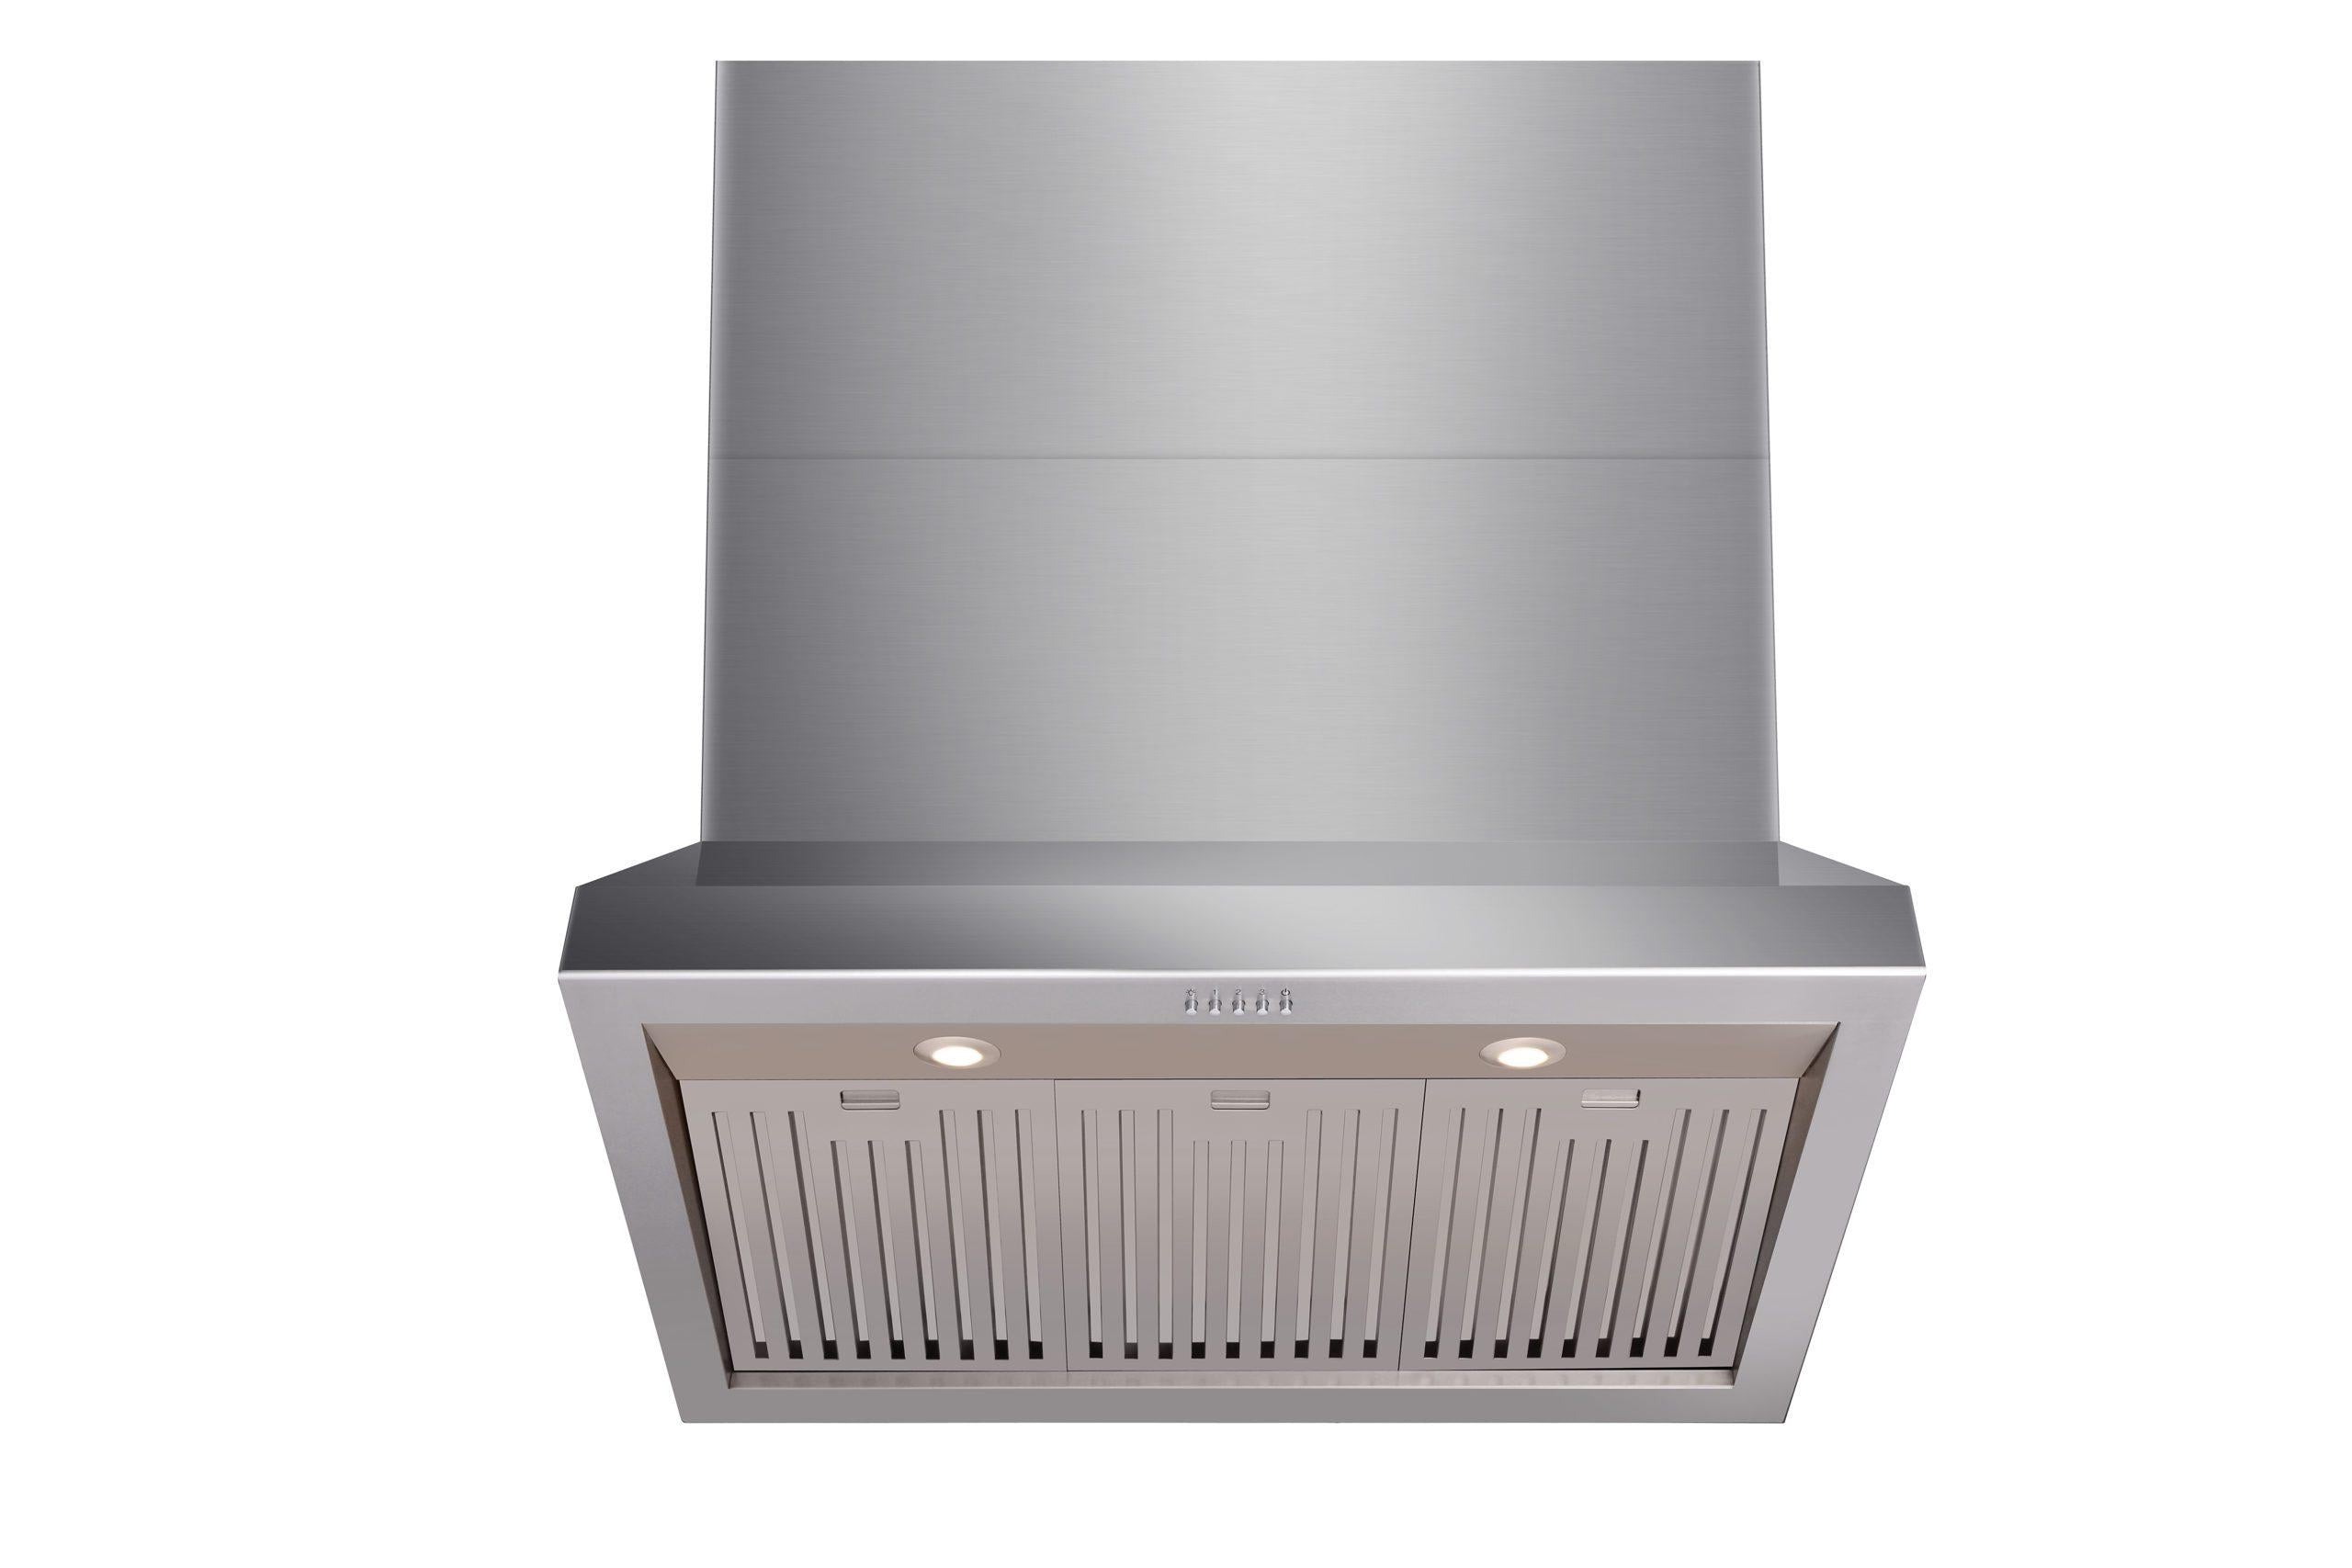 Thor Kitchen 36 Inch Professional Range Hood, 11 Inches Tall In Stainless Steel (duct Cover Sold Separately) - Trh3606